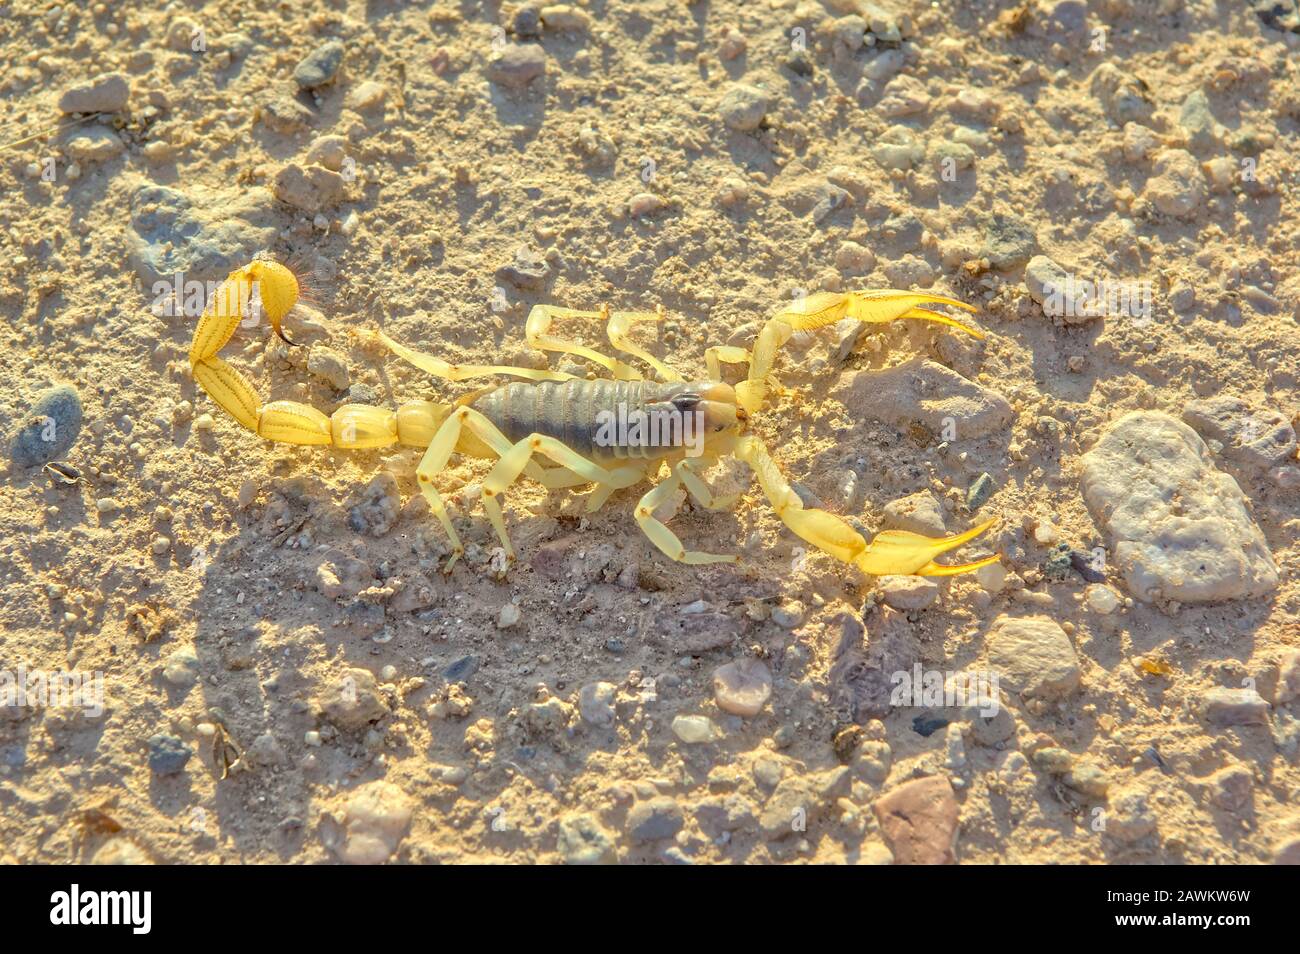 A Giant Hairy Scorpion native to Arizona stretched out in the early morning sun. Stock Photo